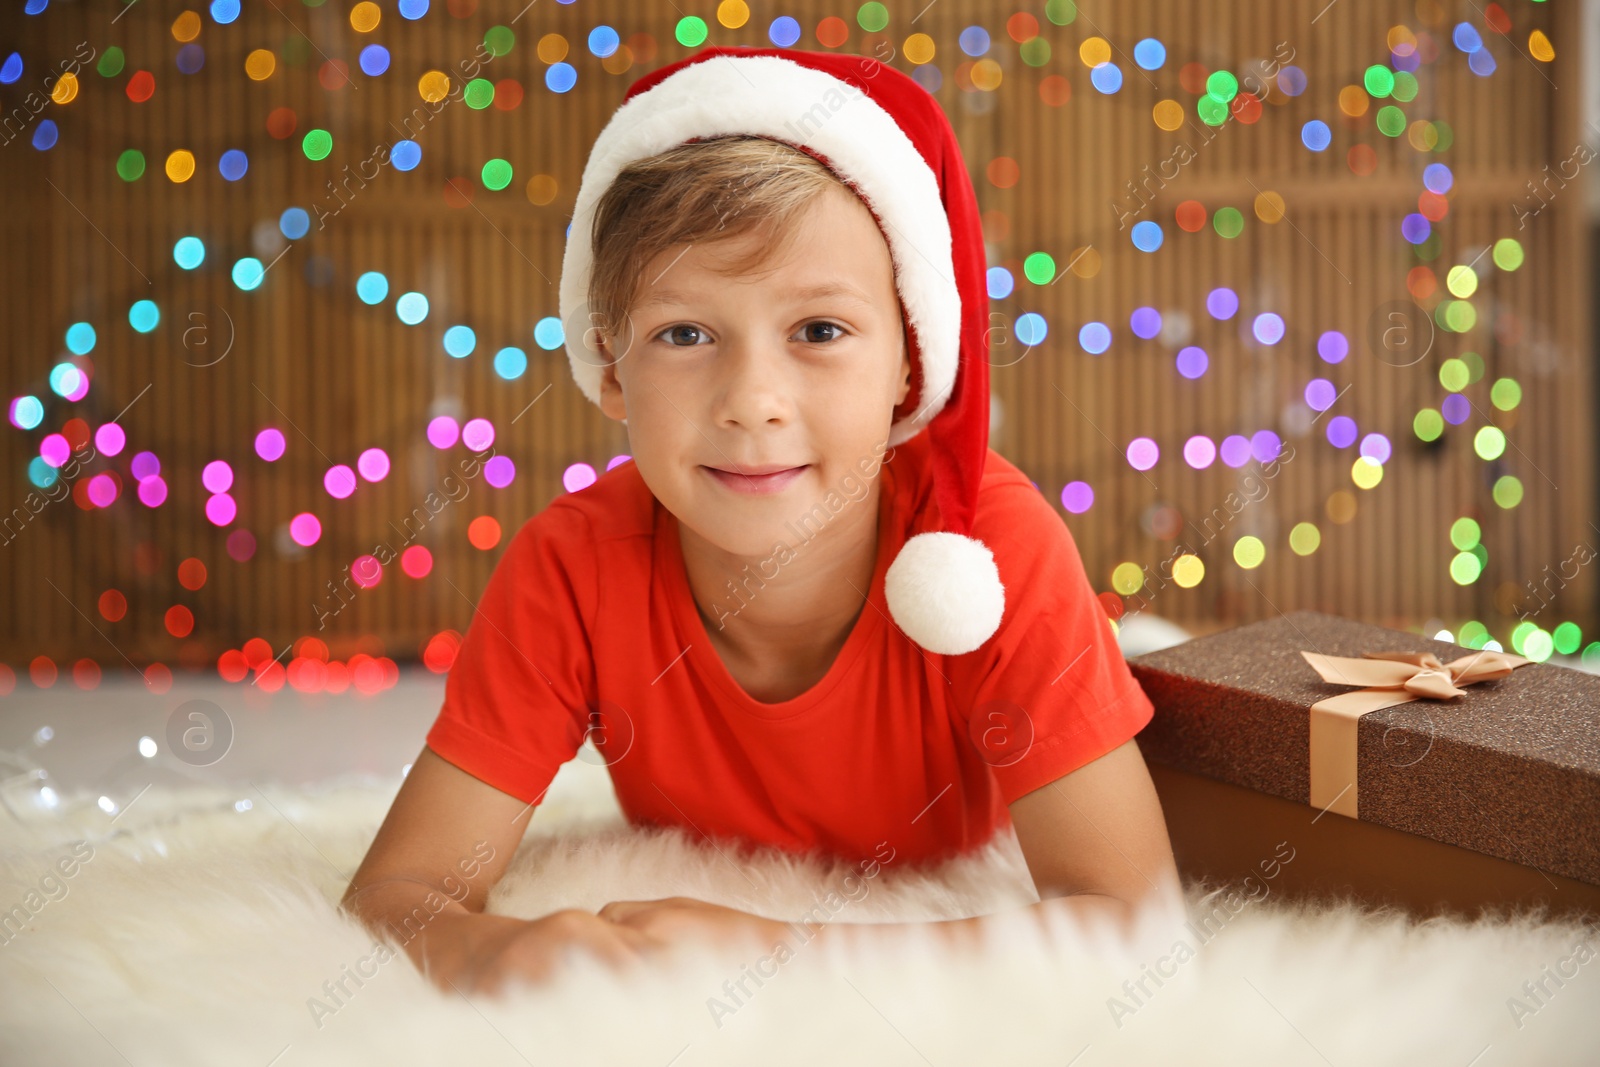 Photo of Cute little child in Santa hat with Christmas gift box lying on floor against blurred lights